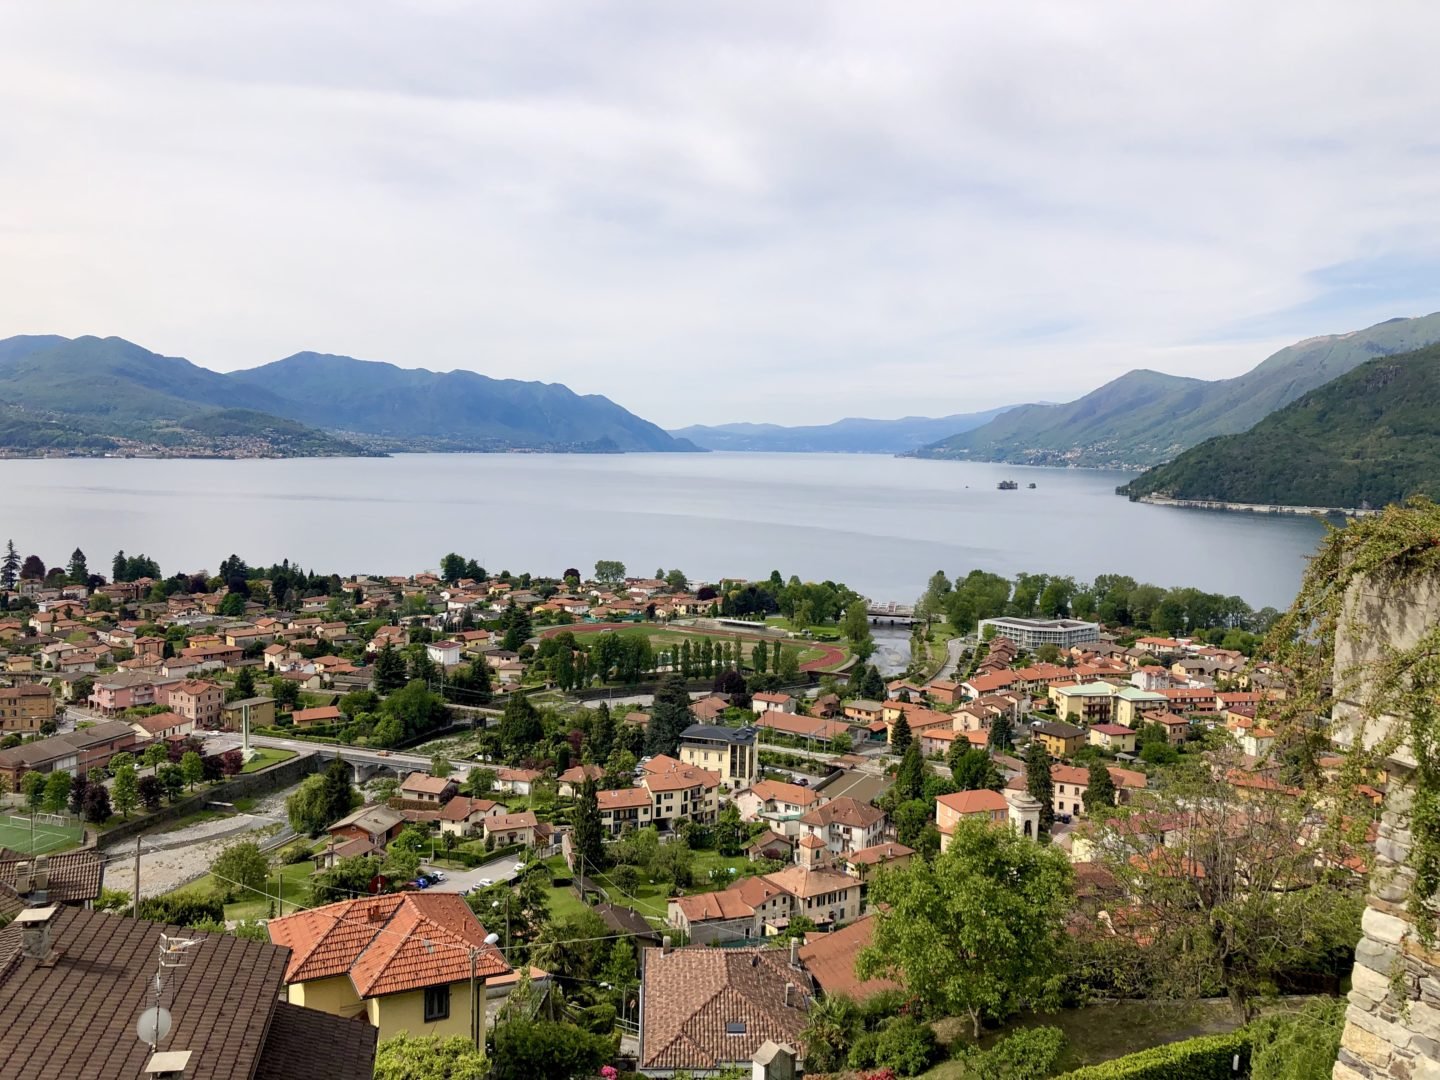 Maccagno town in Lake maggiore.  Its position on the bank of the river is remarkable if you stand on the shore of Maccagno you can see across the shore to the beautiful town of Cannibio and further down the down in to Switzerland and the town of Brissano.